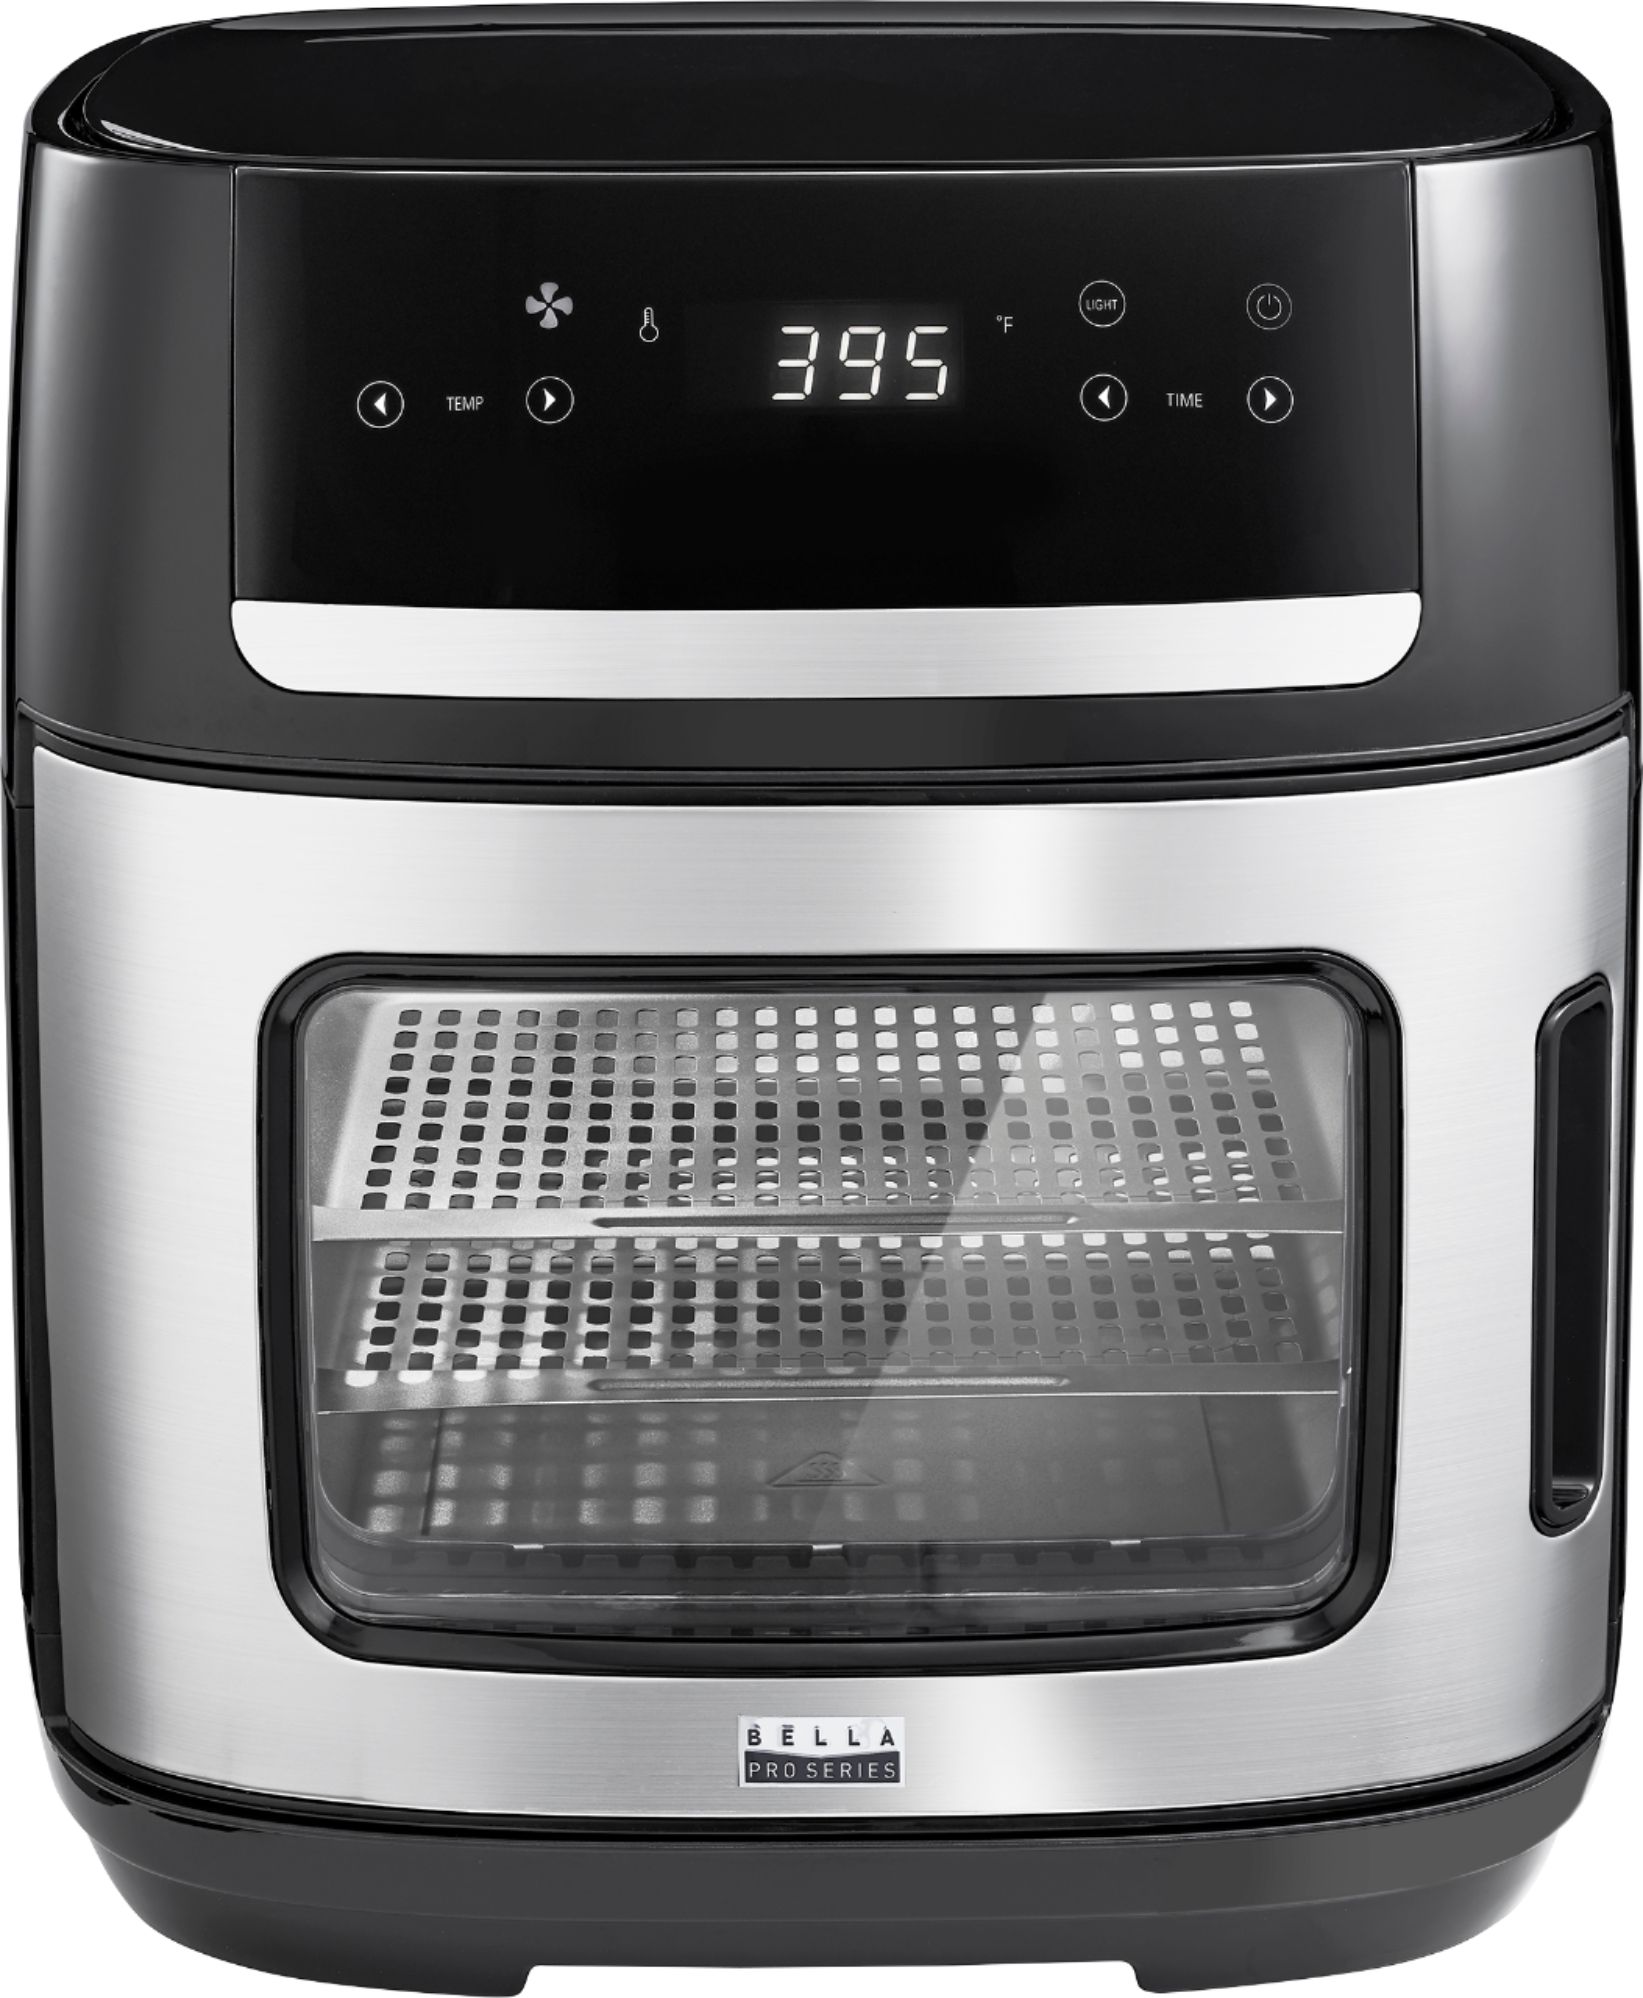 Bella Pro Series - 4-Slice Convection Toaster Oven + Air Fryer with Dehydrator & Rotisserie Settings - Stainless Steel for $69.99+Free Shipping@Bestbuy